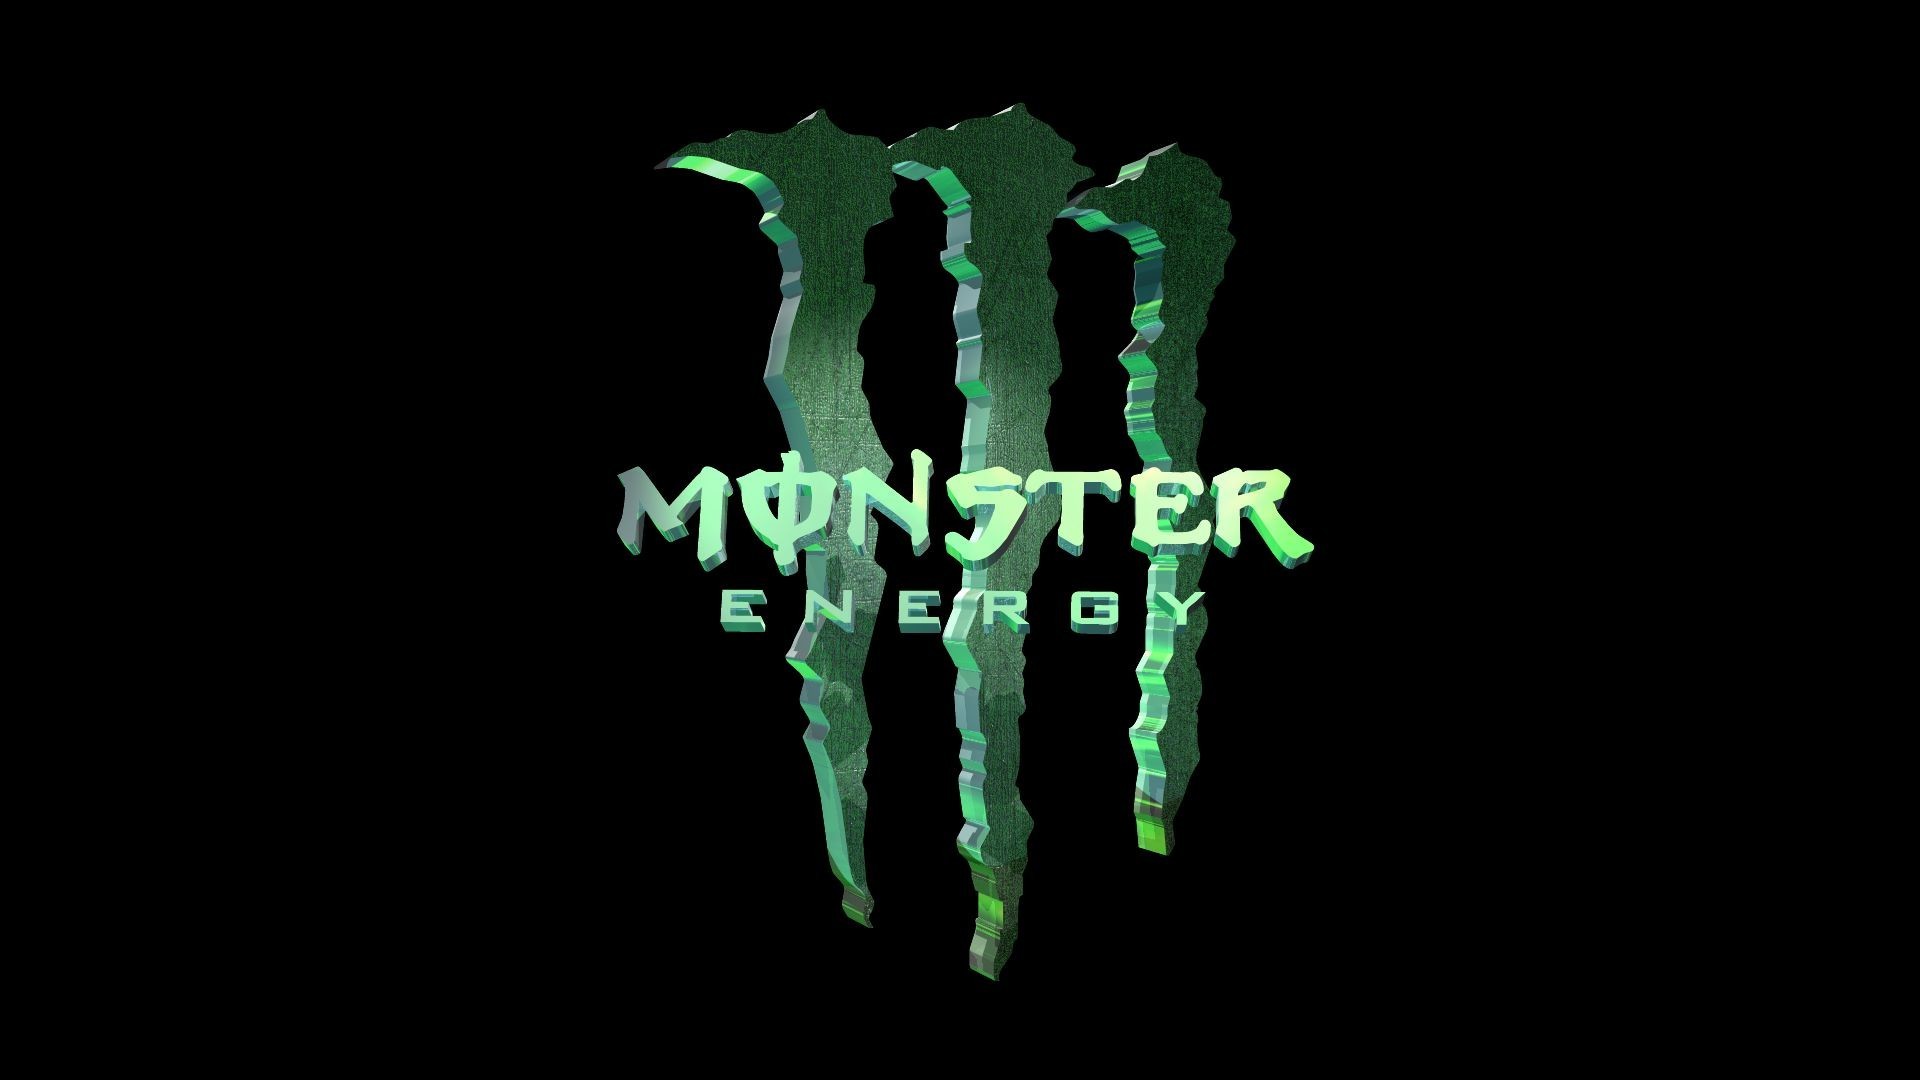 1920x1080 17 Best images about Logos on Pinterest | Logos, Monster energy | Beautiful  Wallpapers |